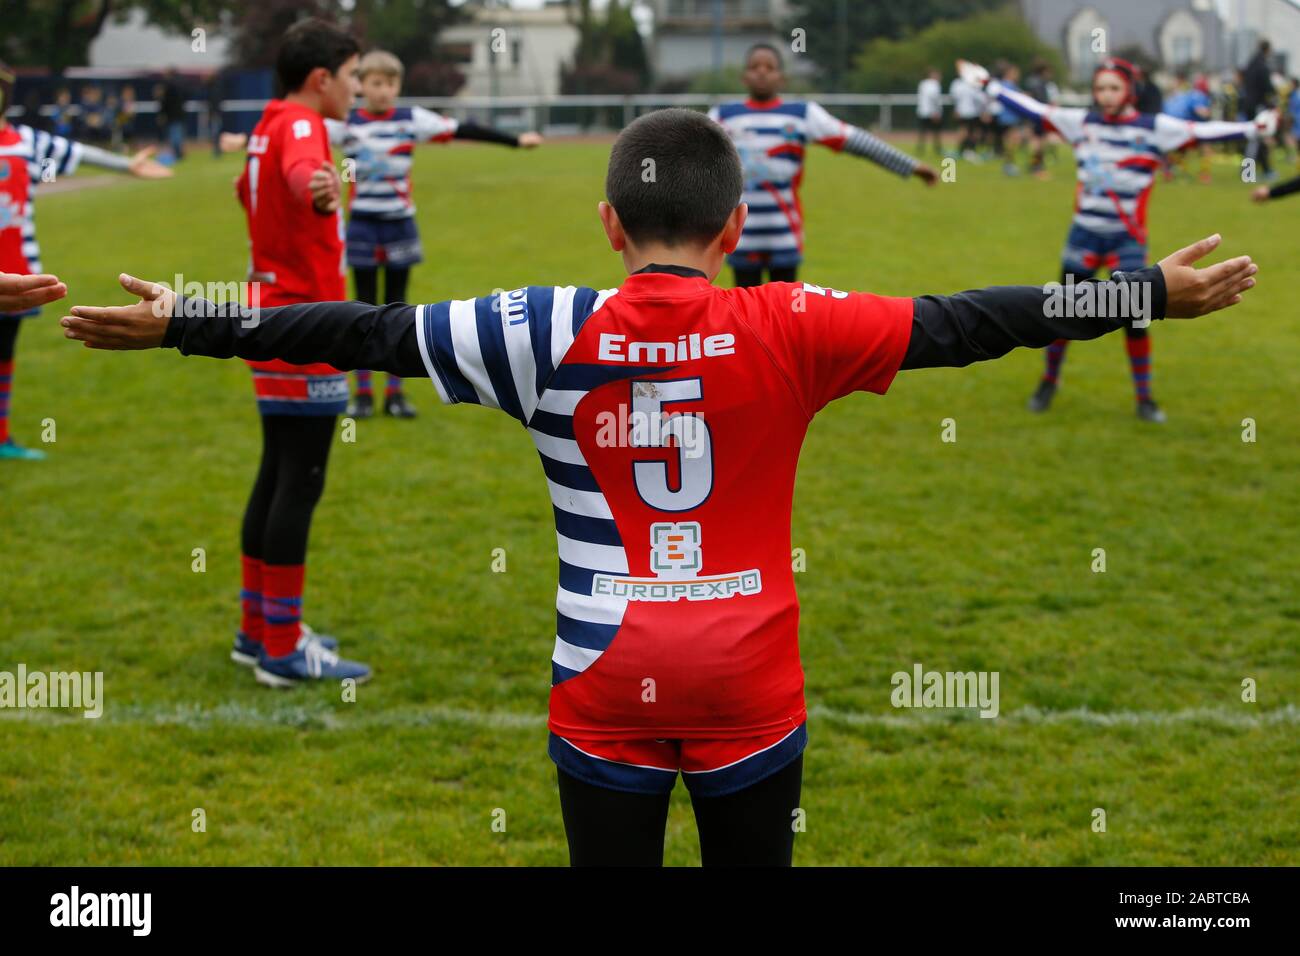 Teenagers warming up before a rugby match in Hauts-de-Seine, France. Stock Photo